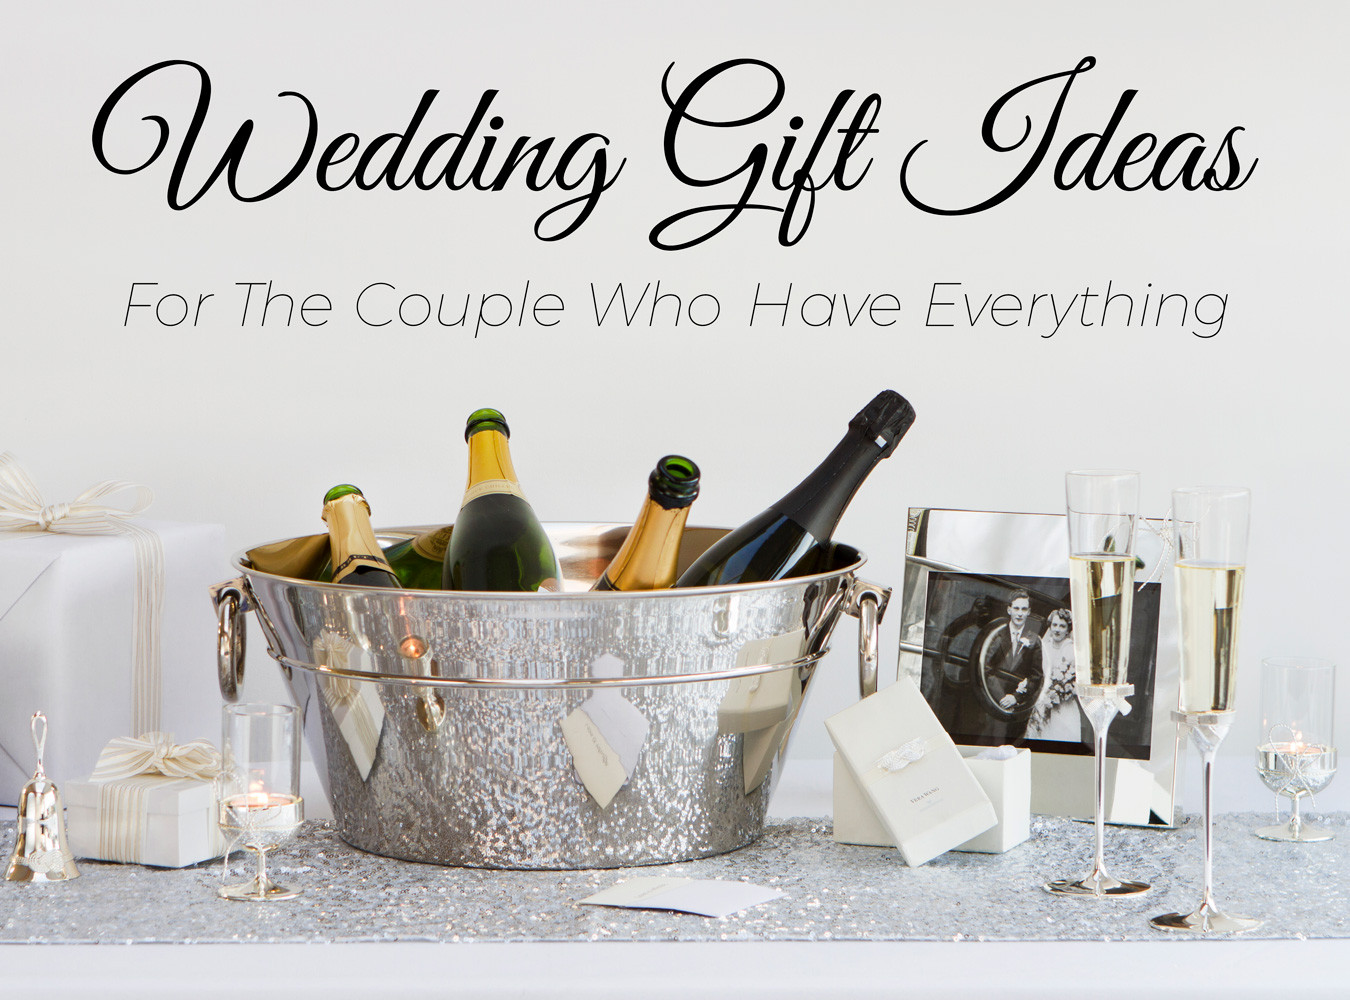 Wedding Gift Ideas For Couples Who Have Everything
 5 Wedding Gift Ideas for the Couple Who Have Everything